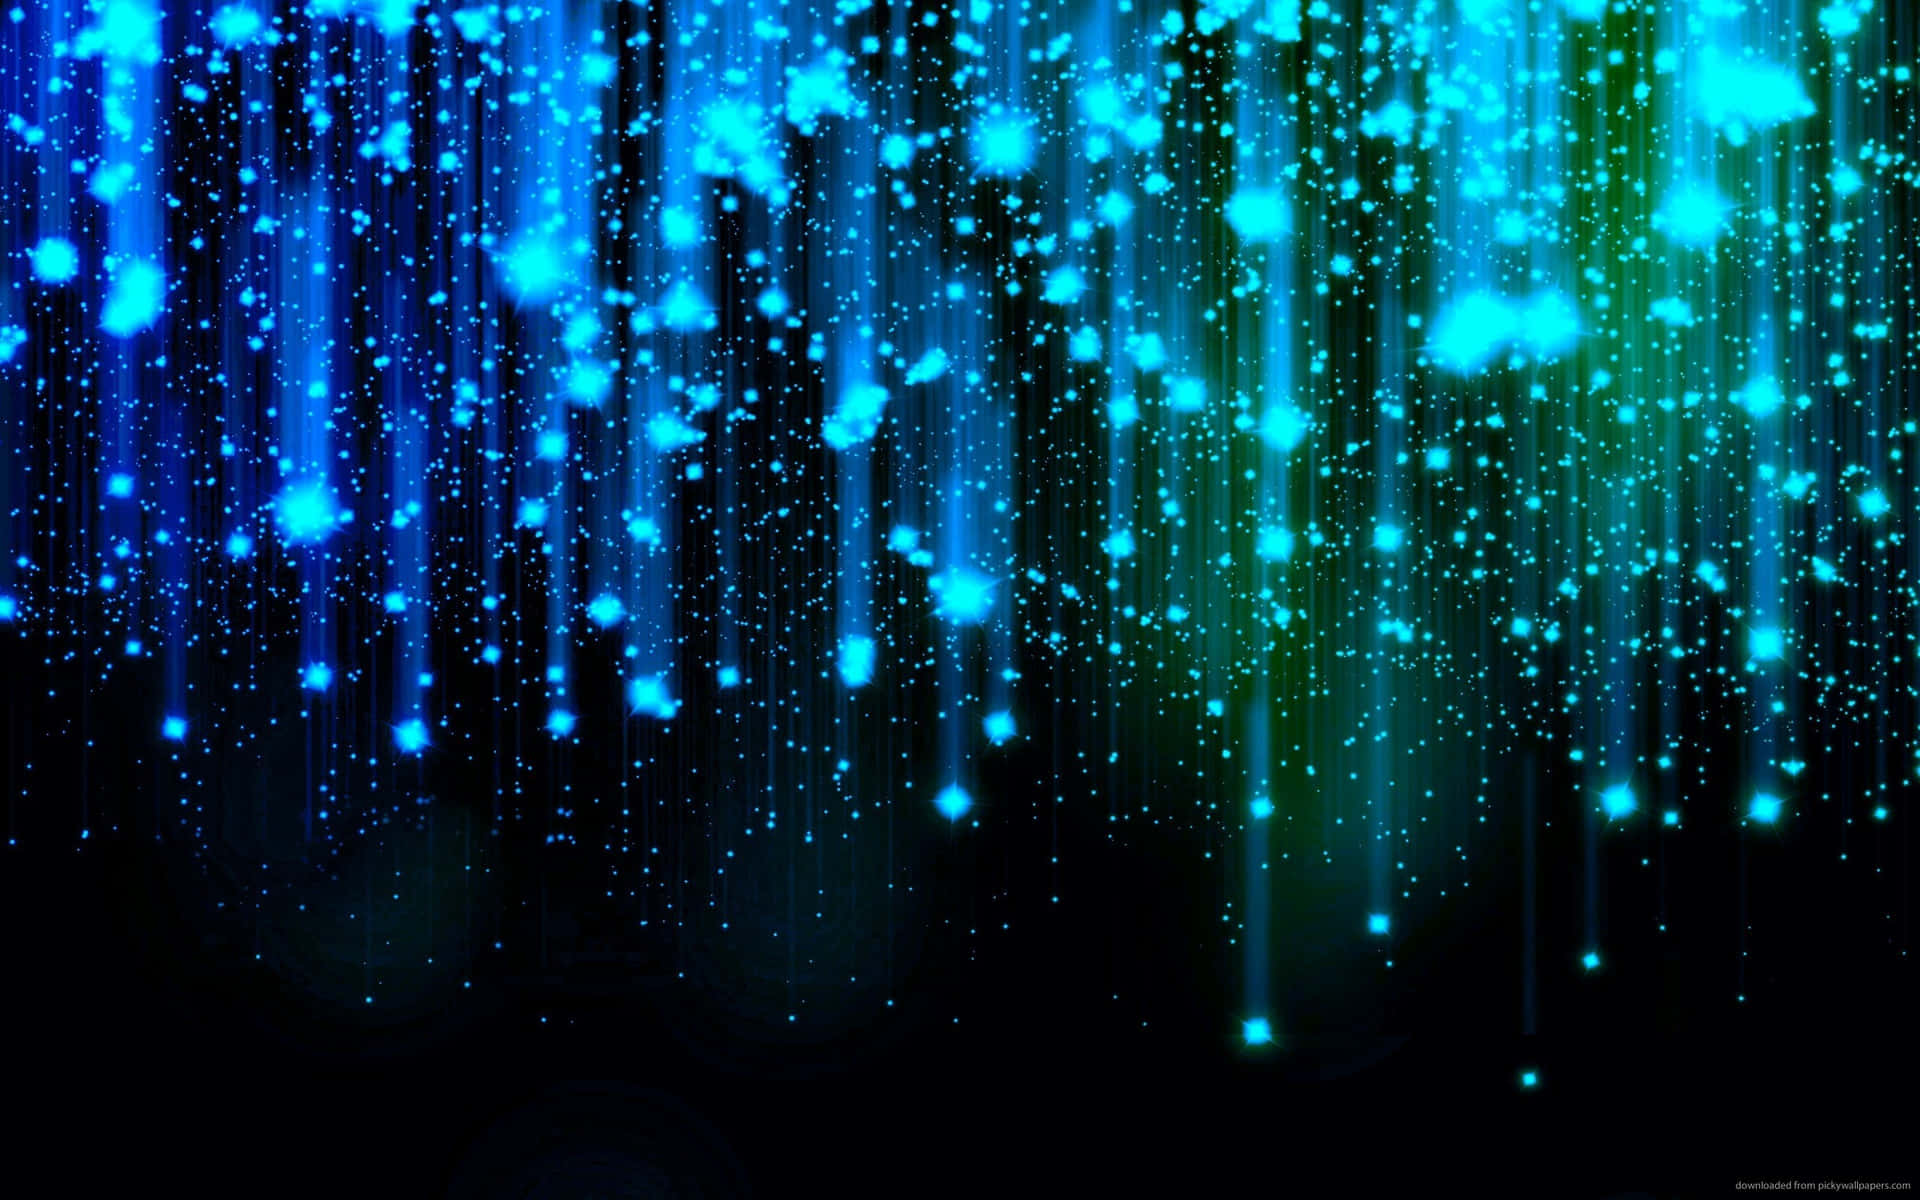 Blue And Green Rain Drops On A Black Background Wallpaper